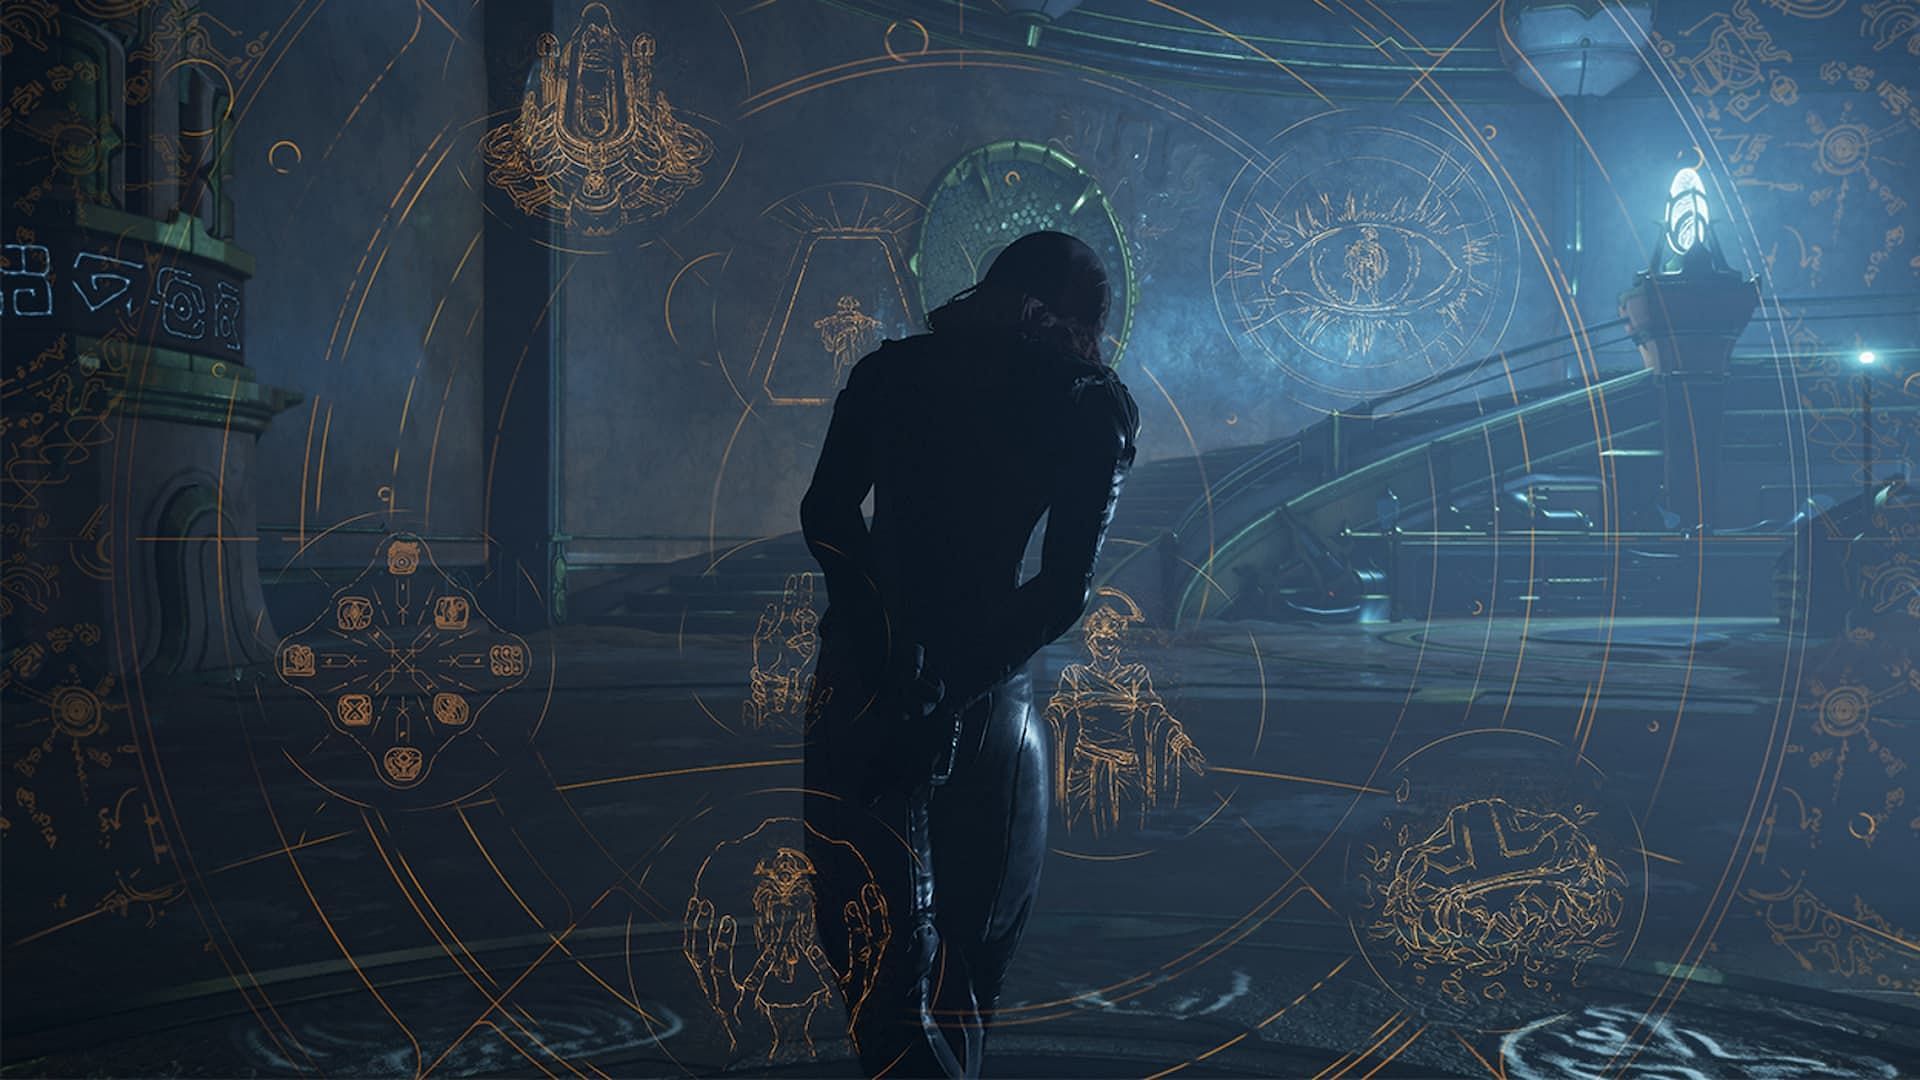 Warframe Whispers in the Wells key art featuring vitruvian themed frames